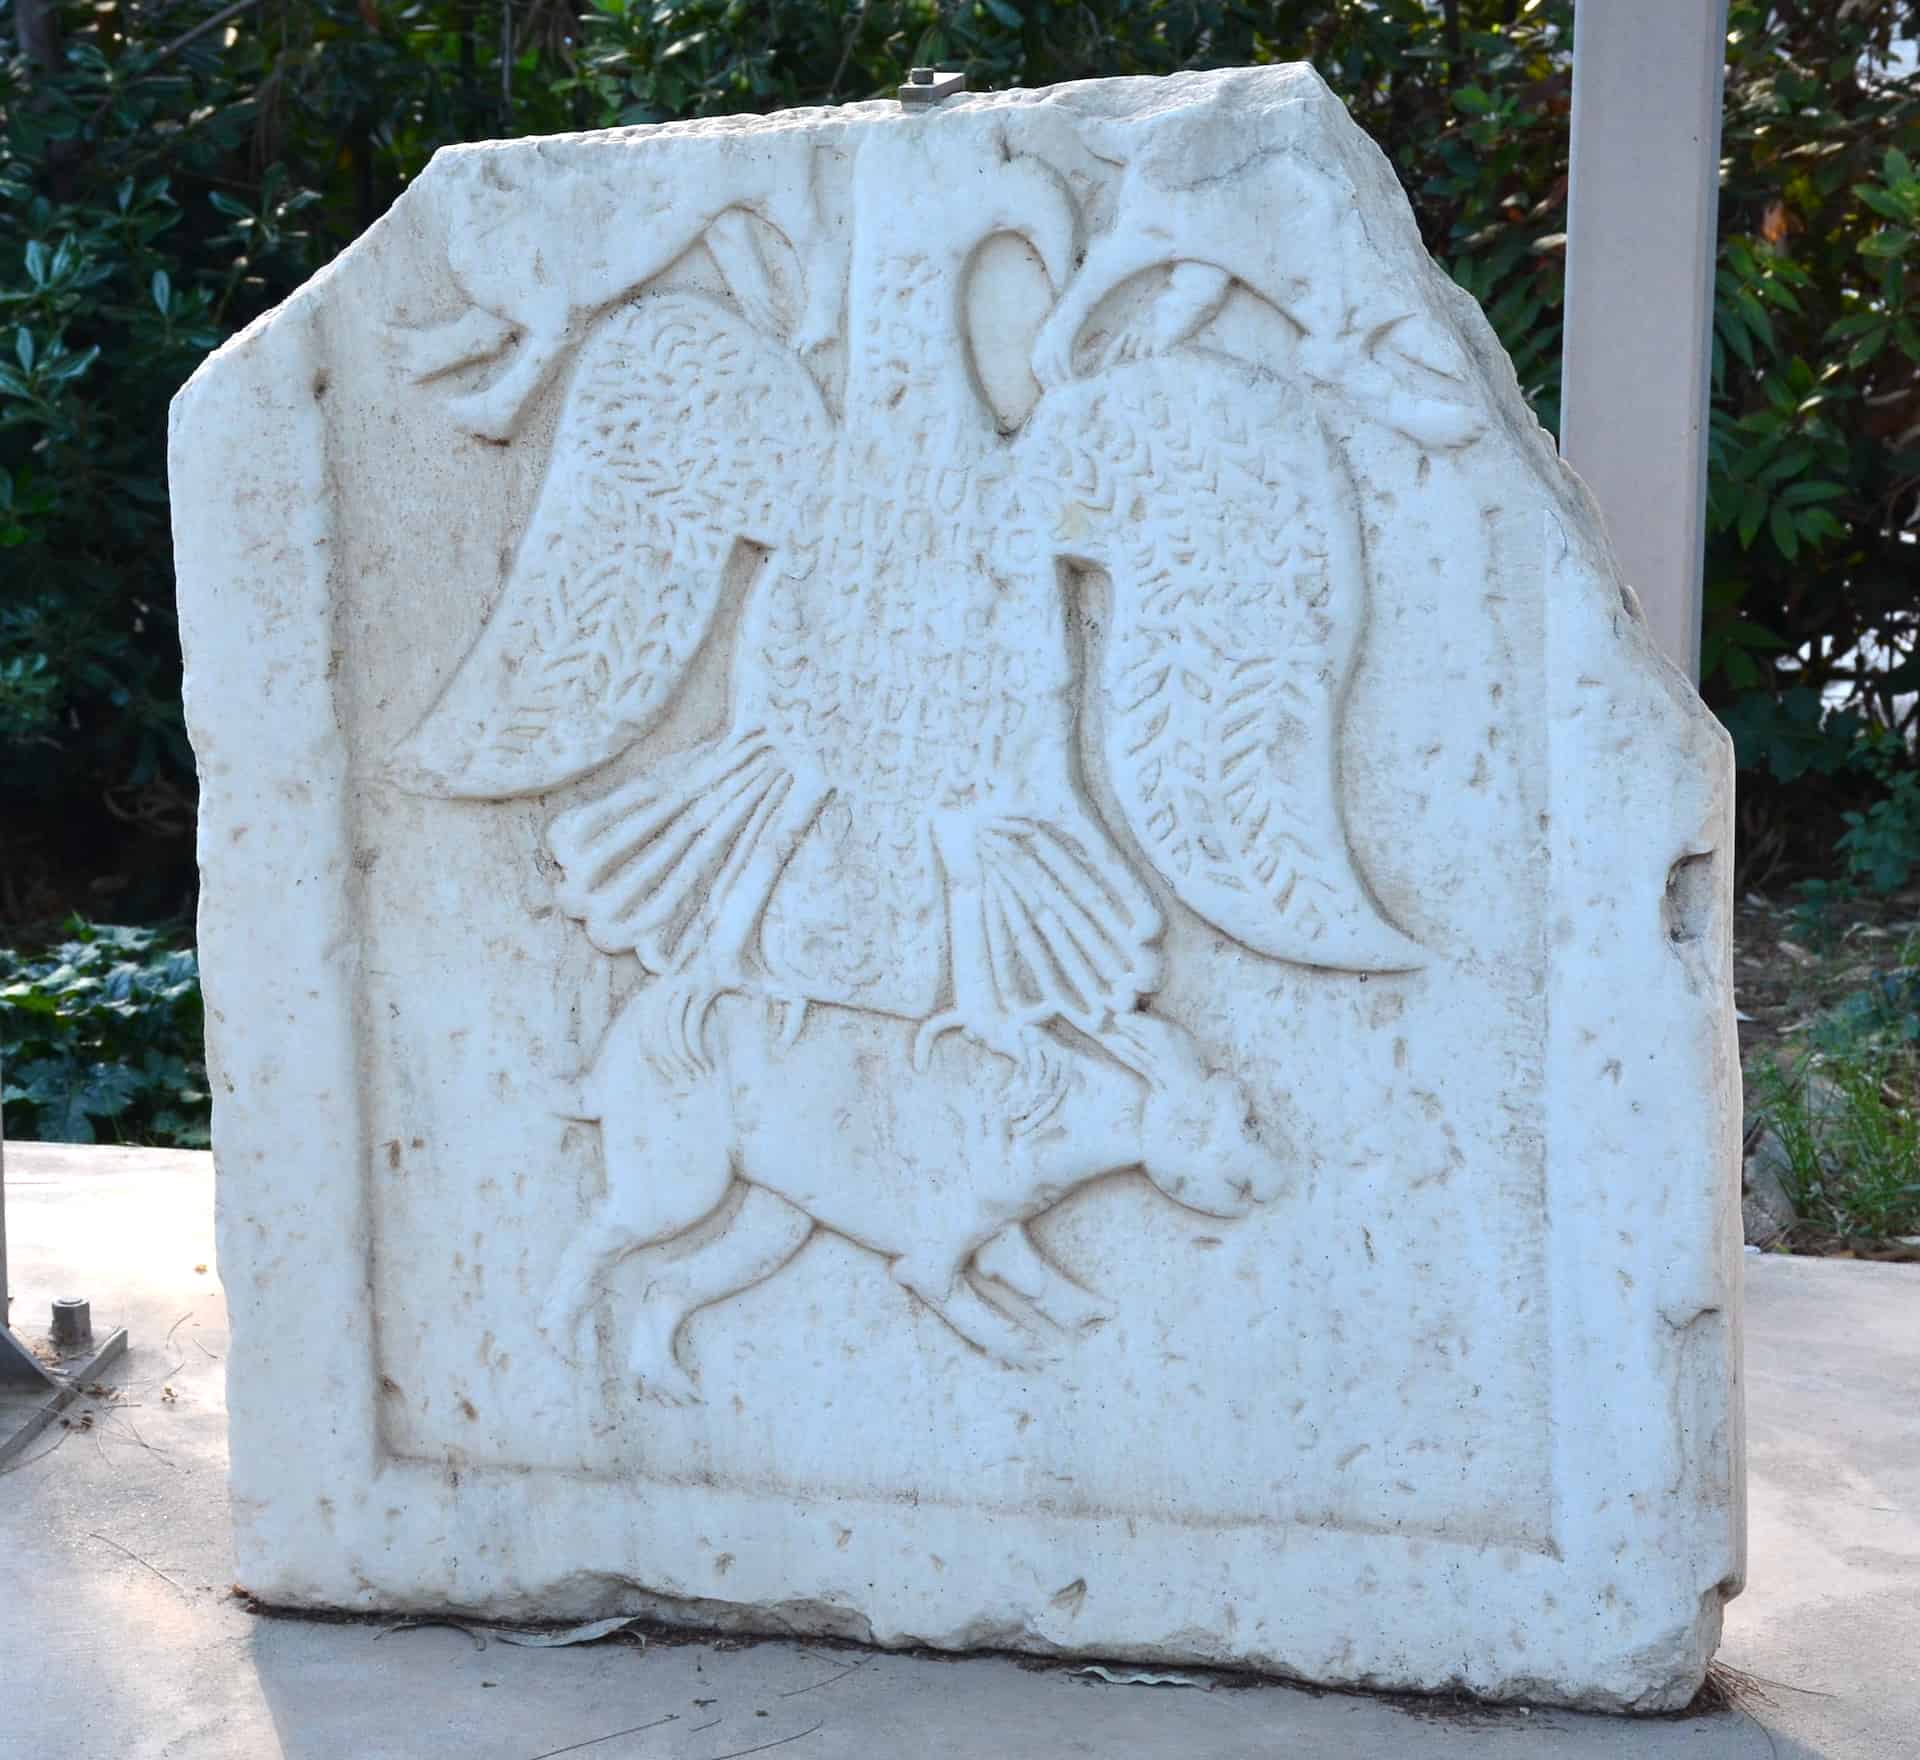 Closure slab depicting a predator and its prey, 11th century in the Byzantine Church in the Paradise exhibit in the gardens at Villa Ilissia (Byzantine Museum) in Athens, Greece